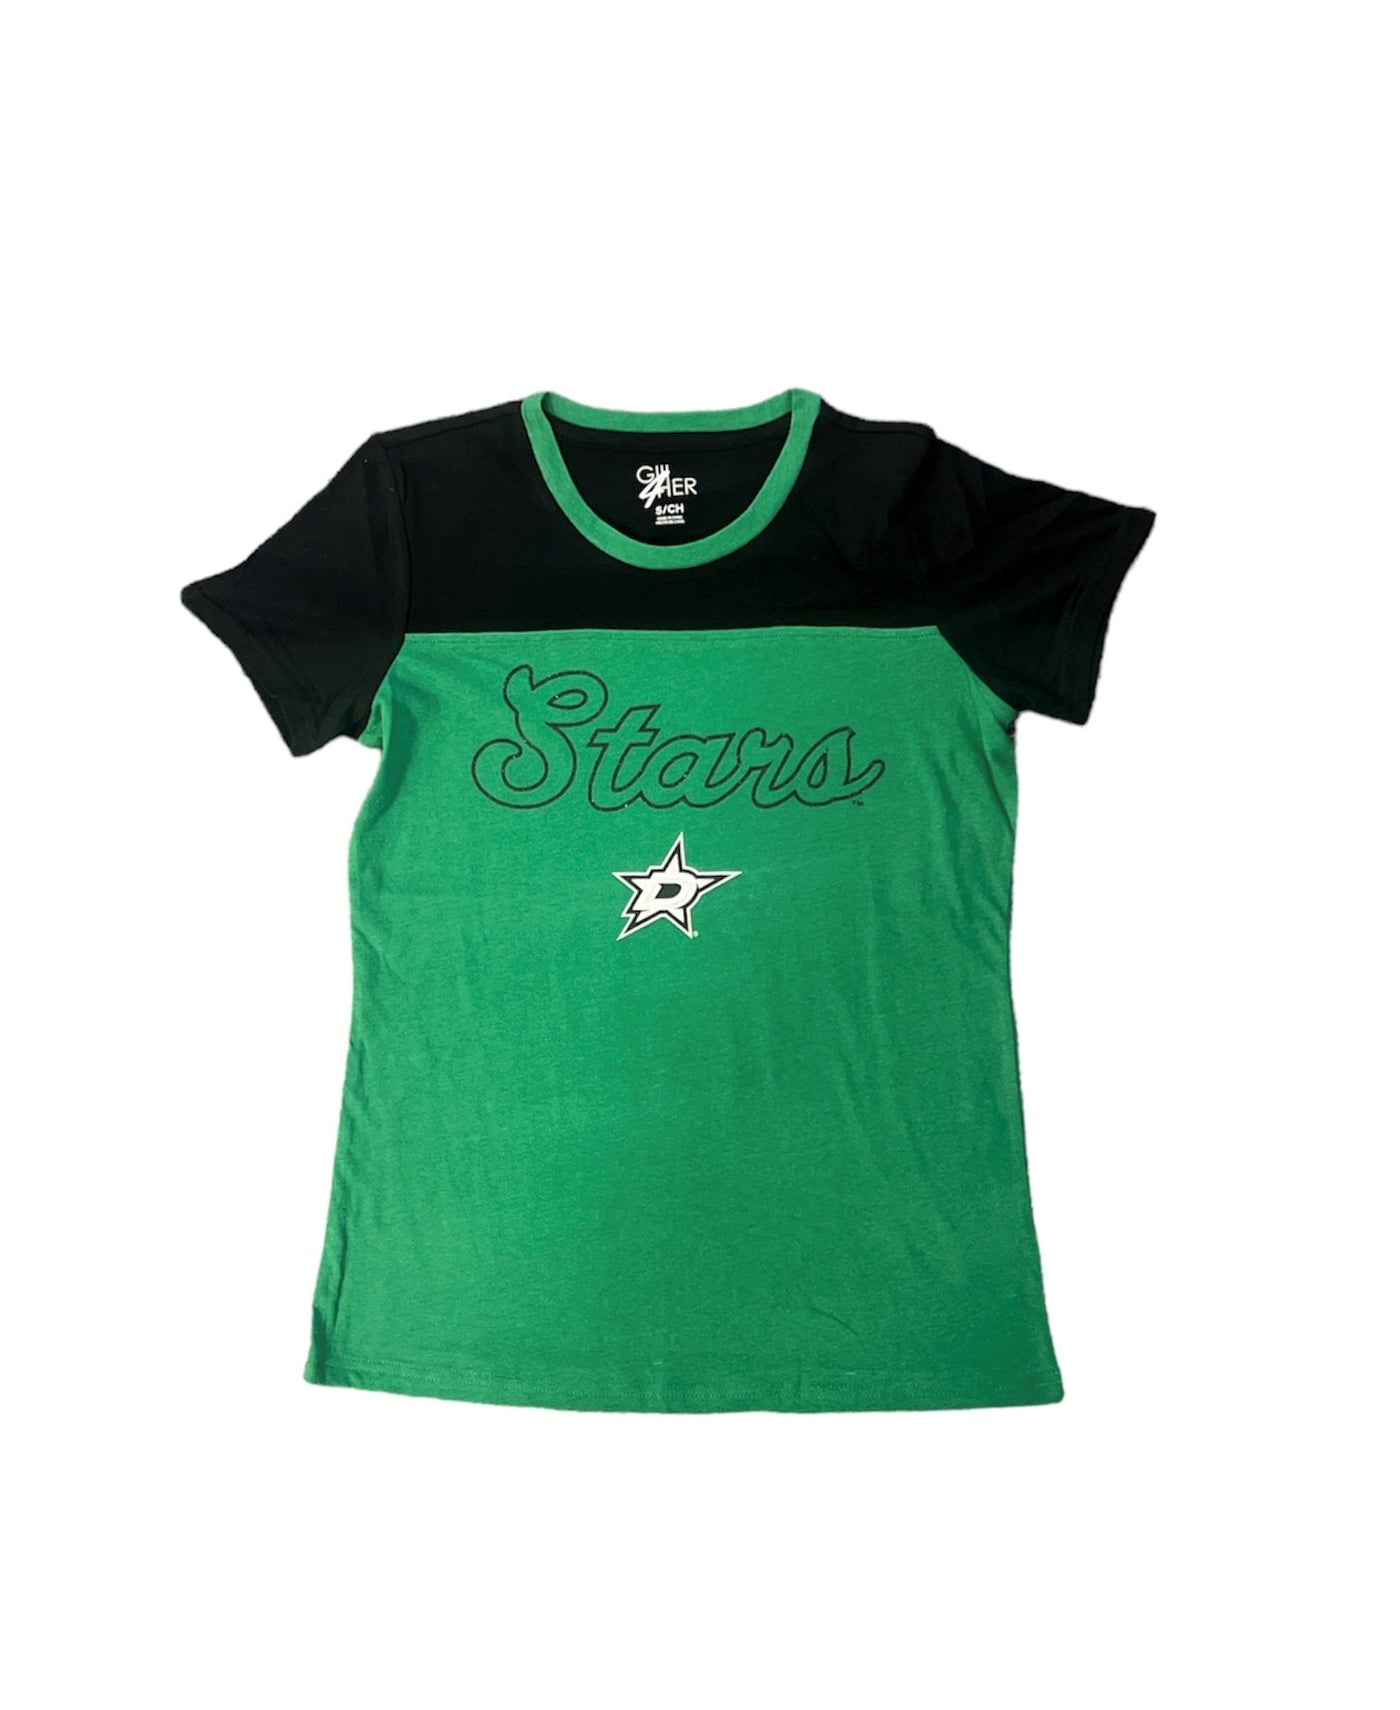 DALLAS STARS WOMEN'S G-III FOR HER GLITTER S/S - FRONT VIEW